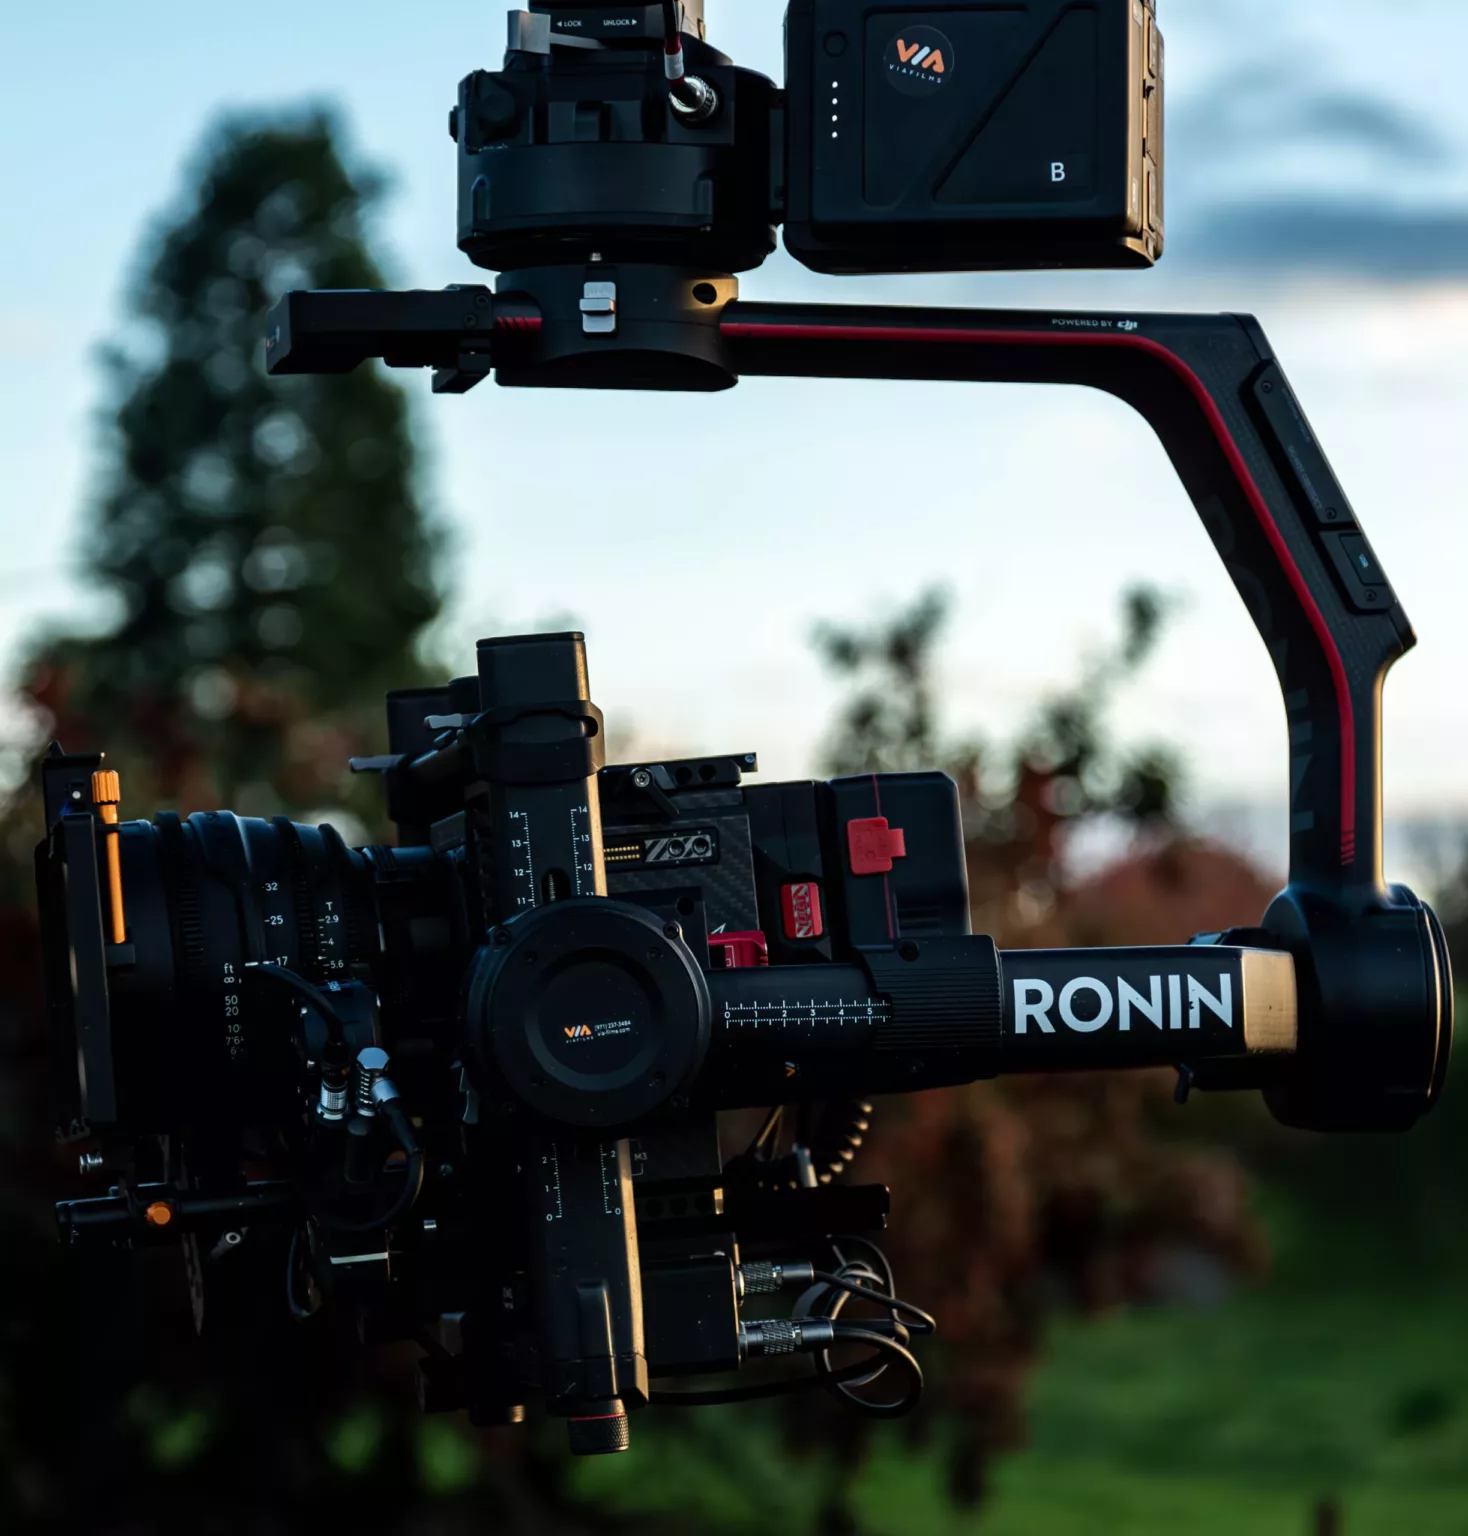 DJI Ronin 2 with RED DSMC2 Monstro and cinema lens